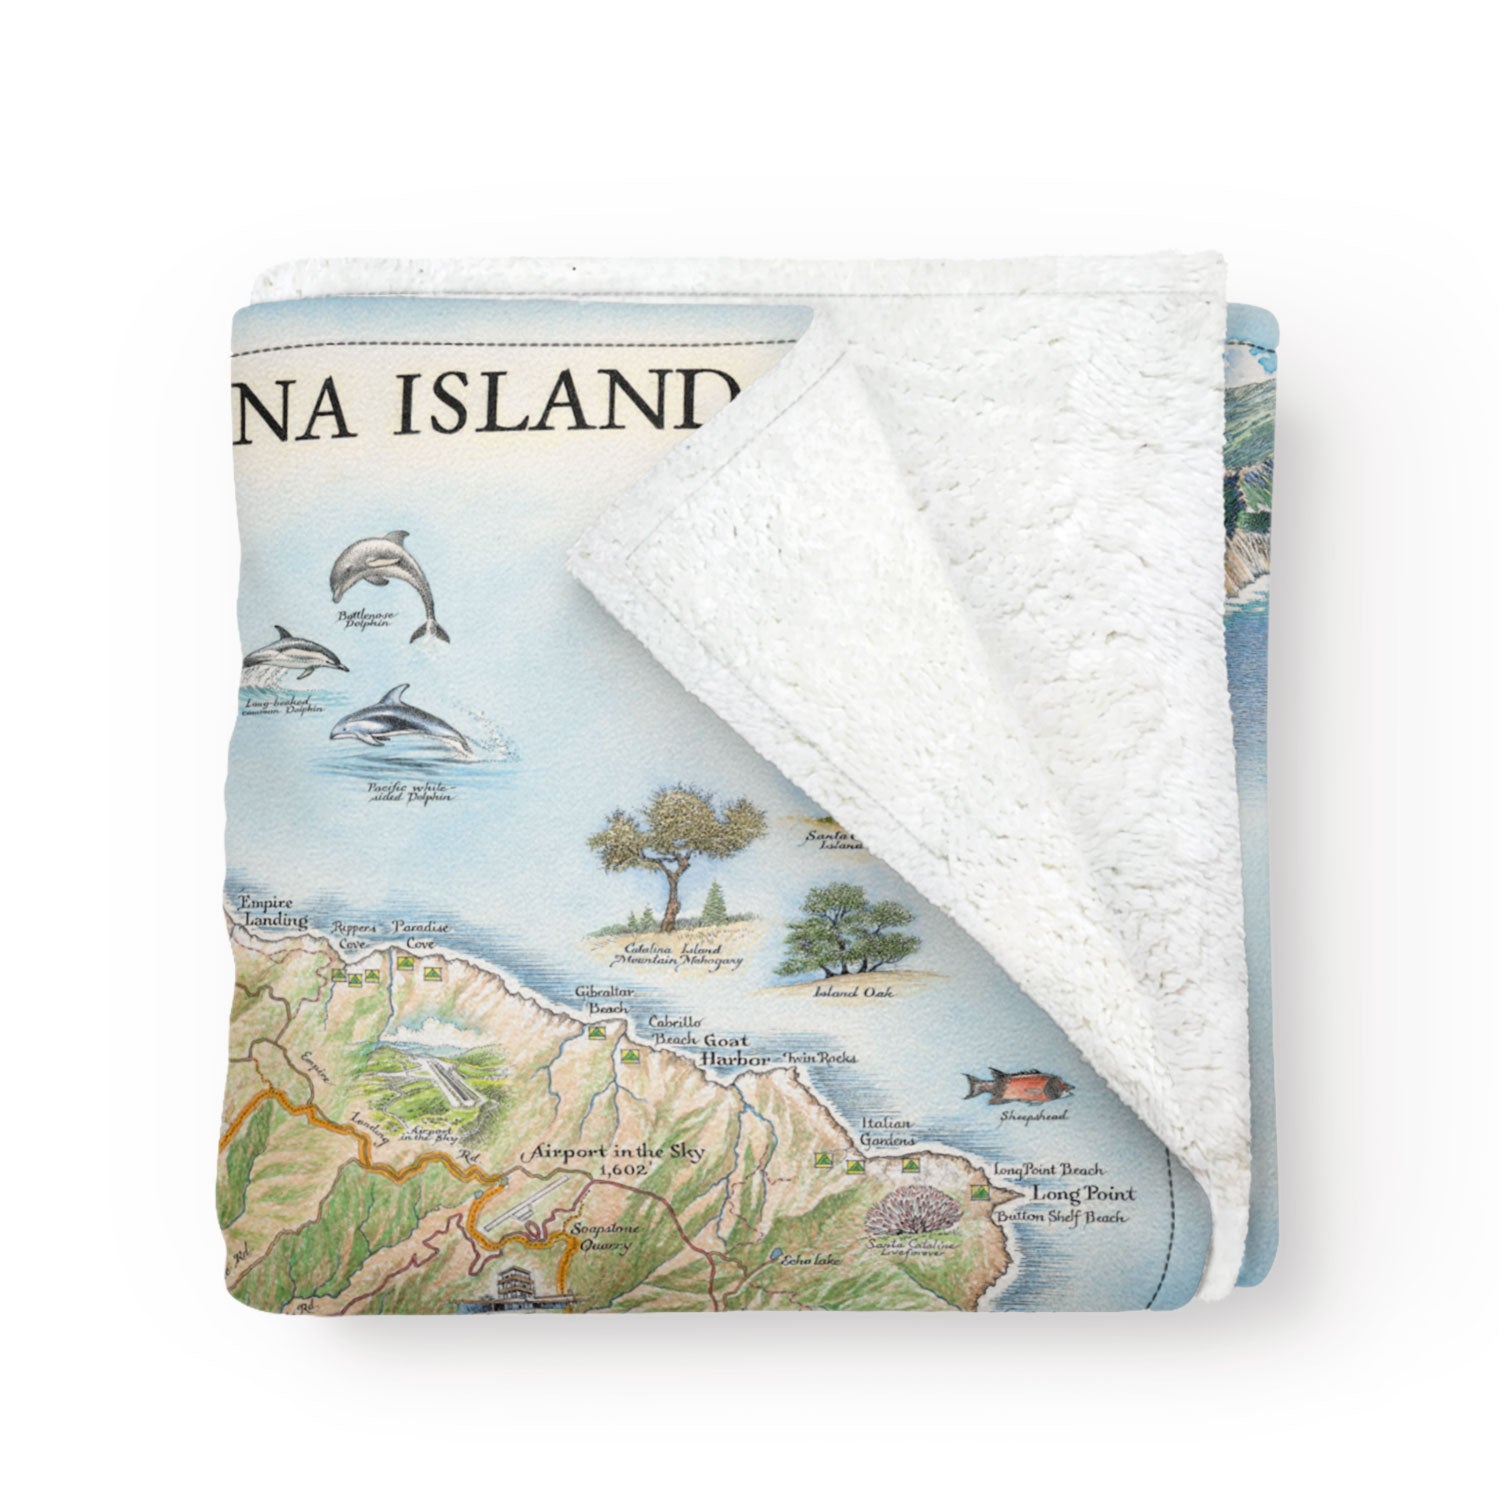 Colorful, folded blanket with map of Santa Catalina Island.